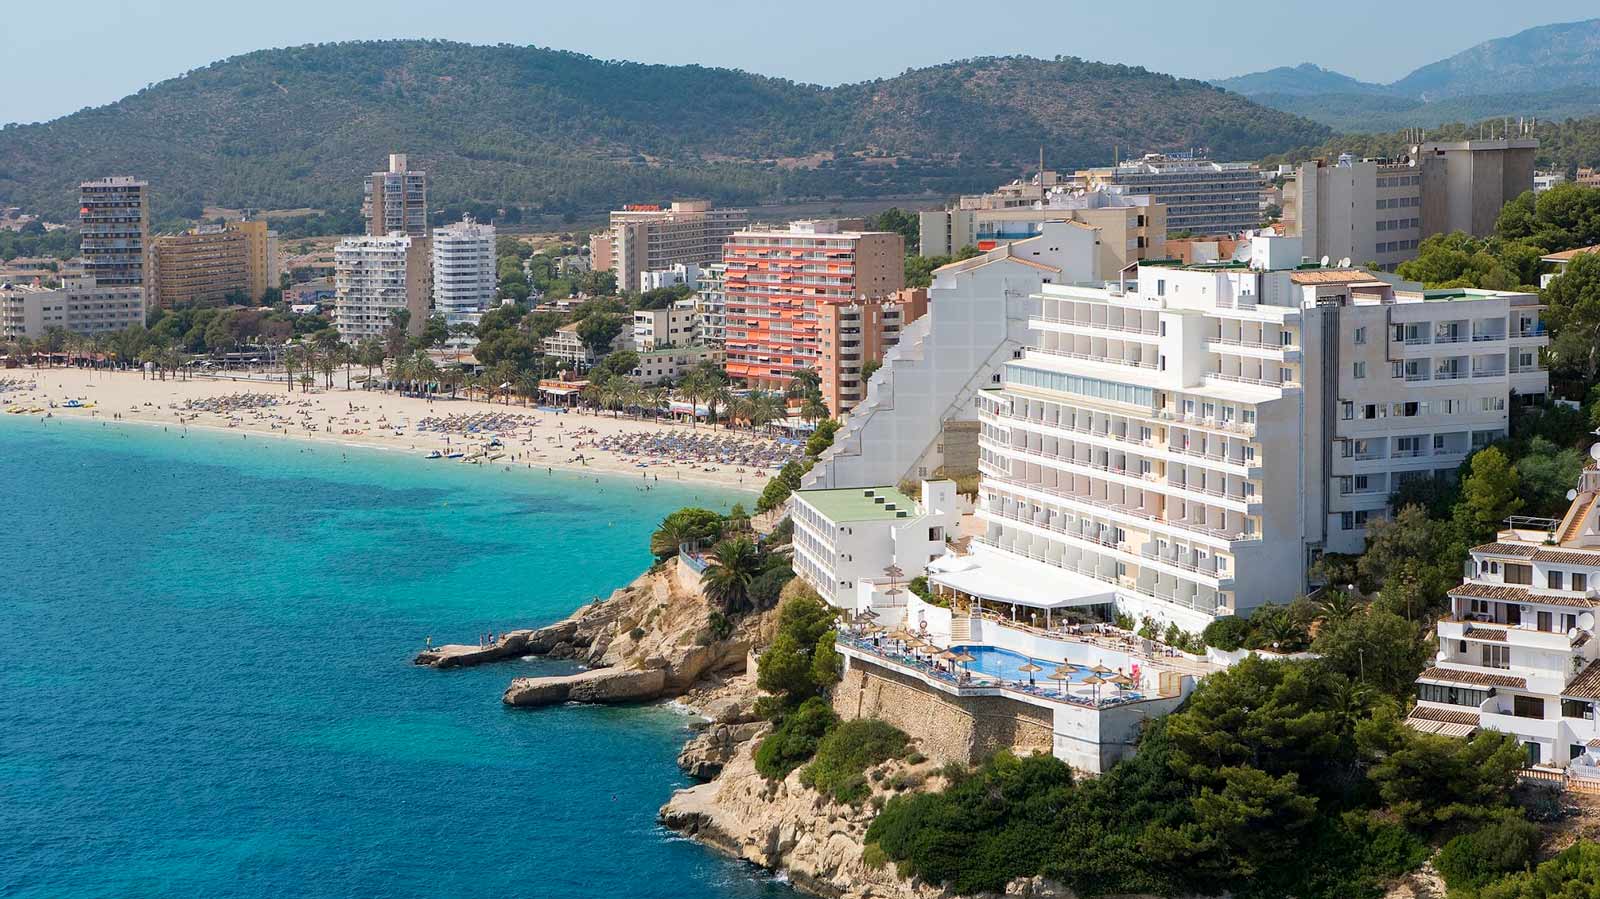 Couple’s Majorca Holiday Allegedly Ruined By Hotel Worker’s Shocking Act